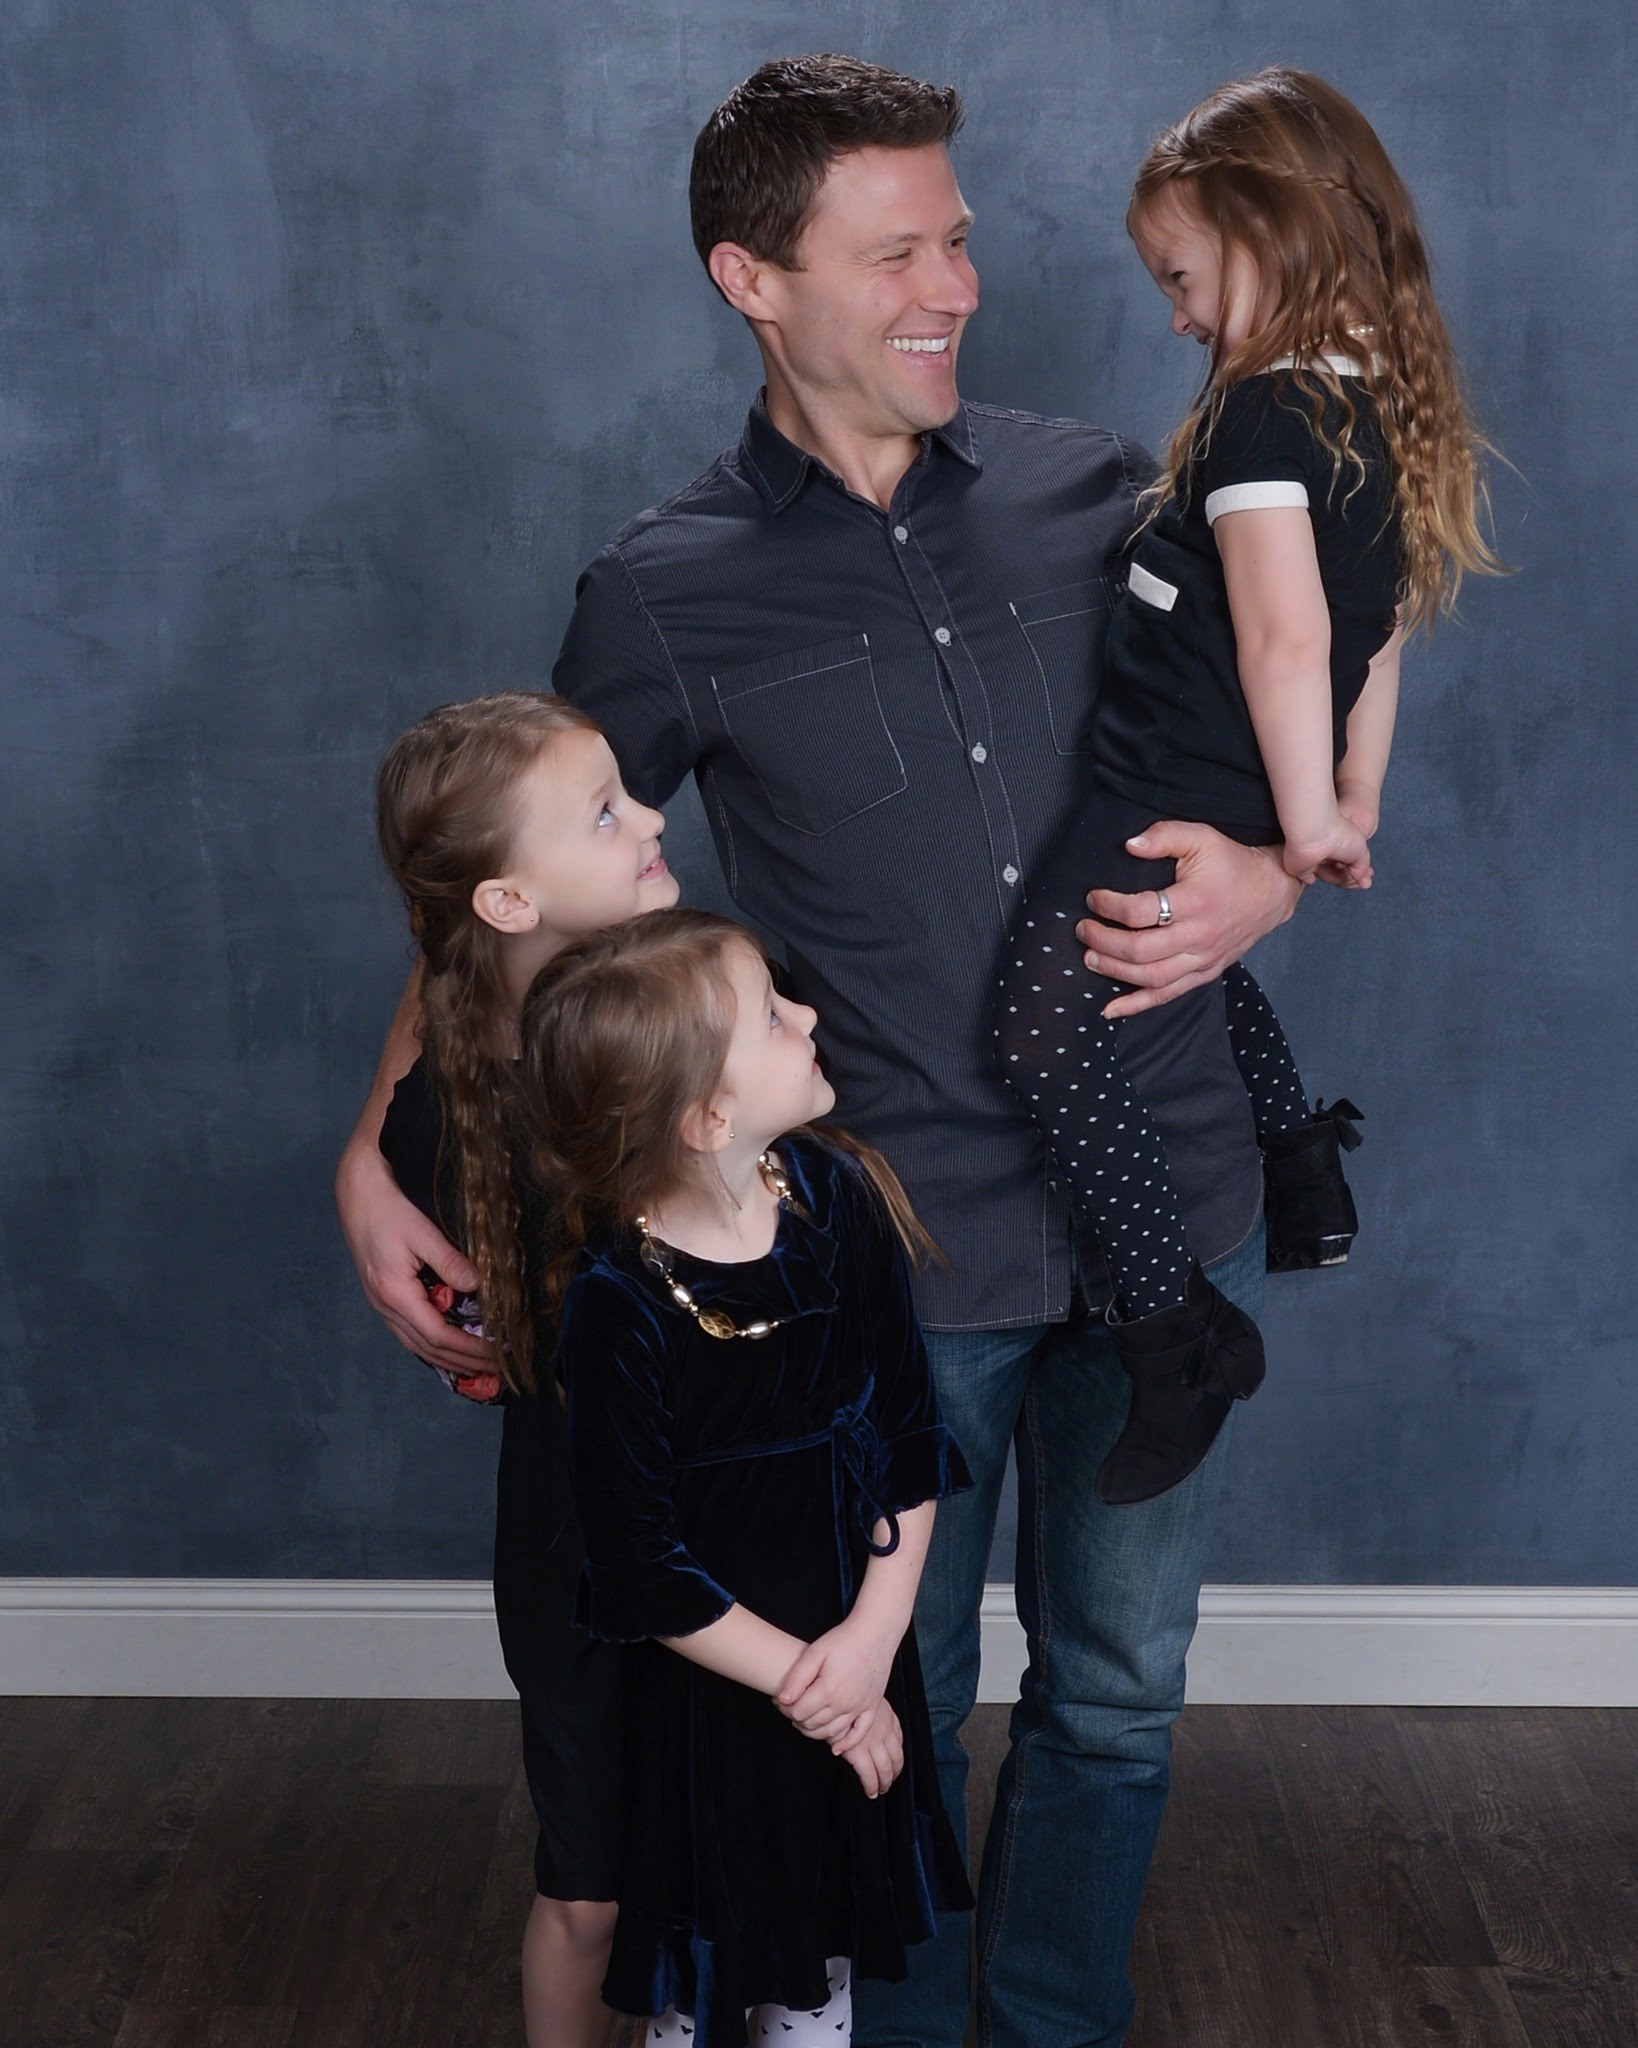 JC Cross with his three daughters laughing